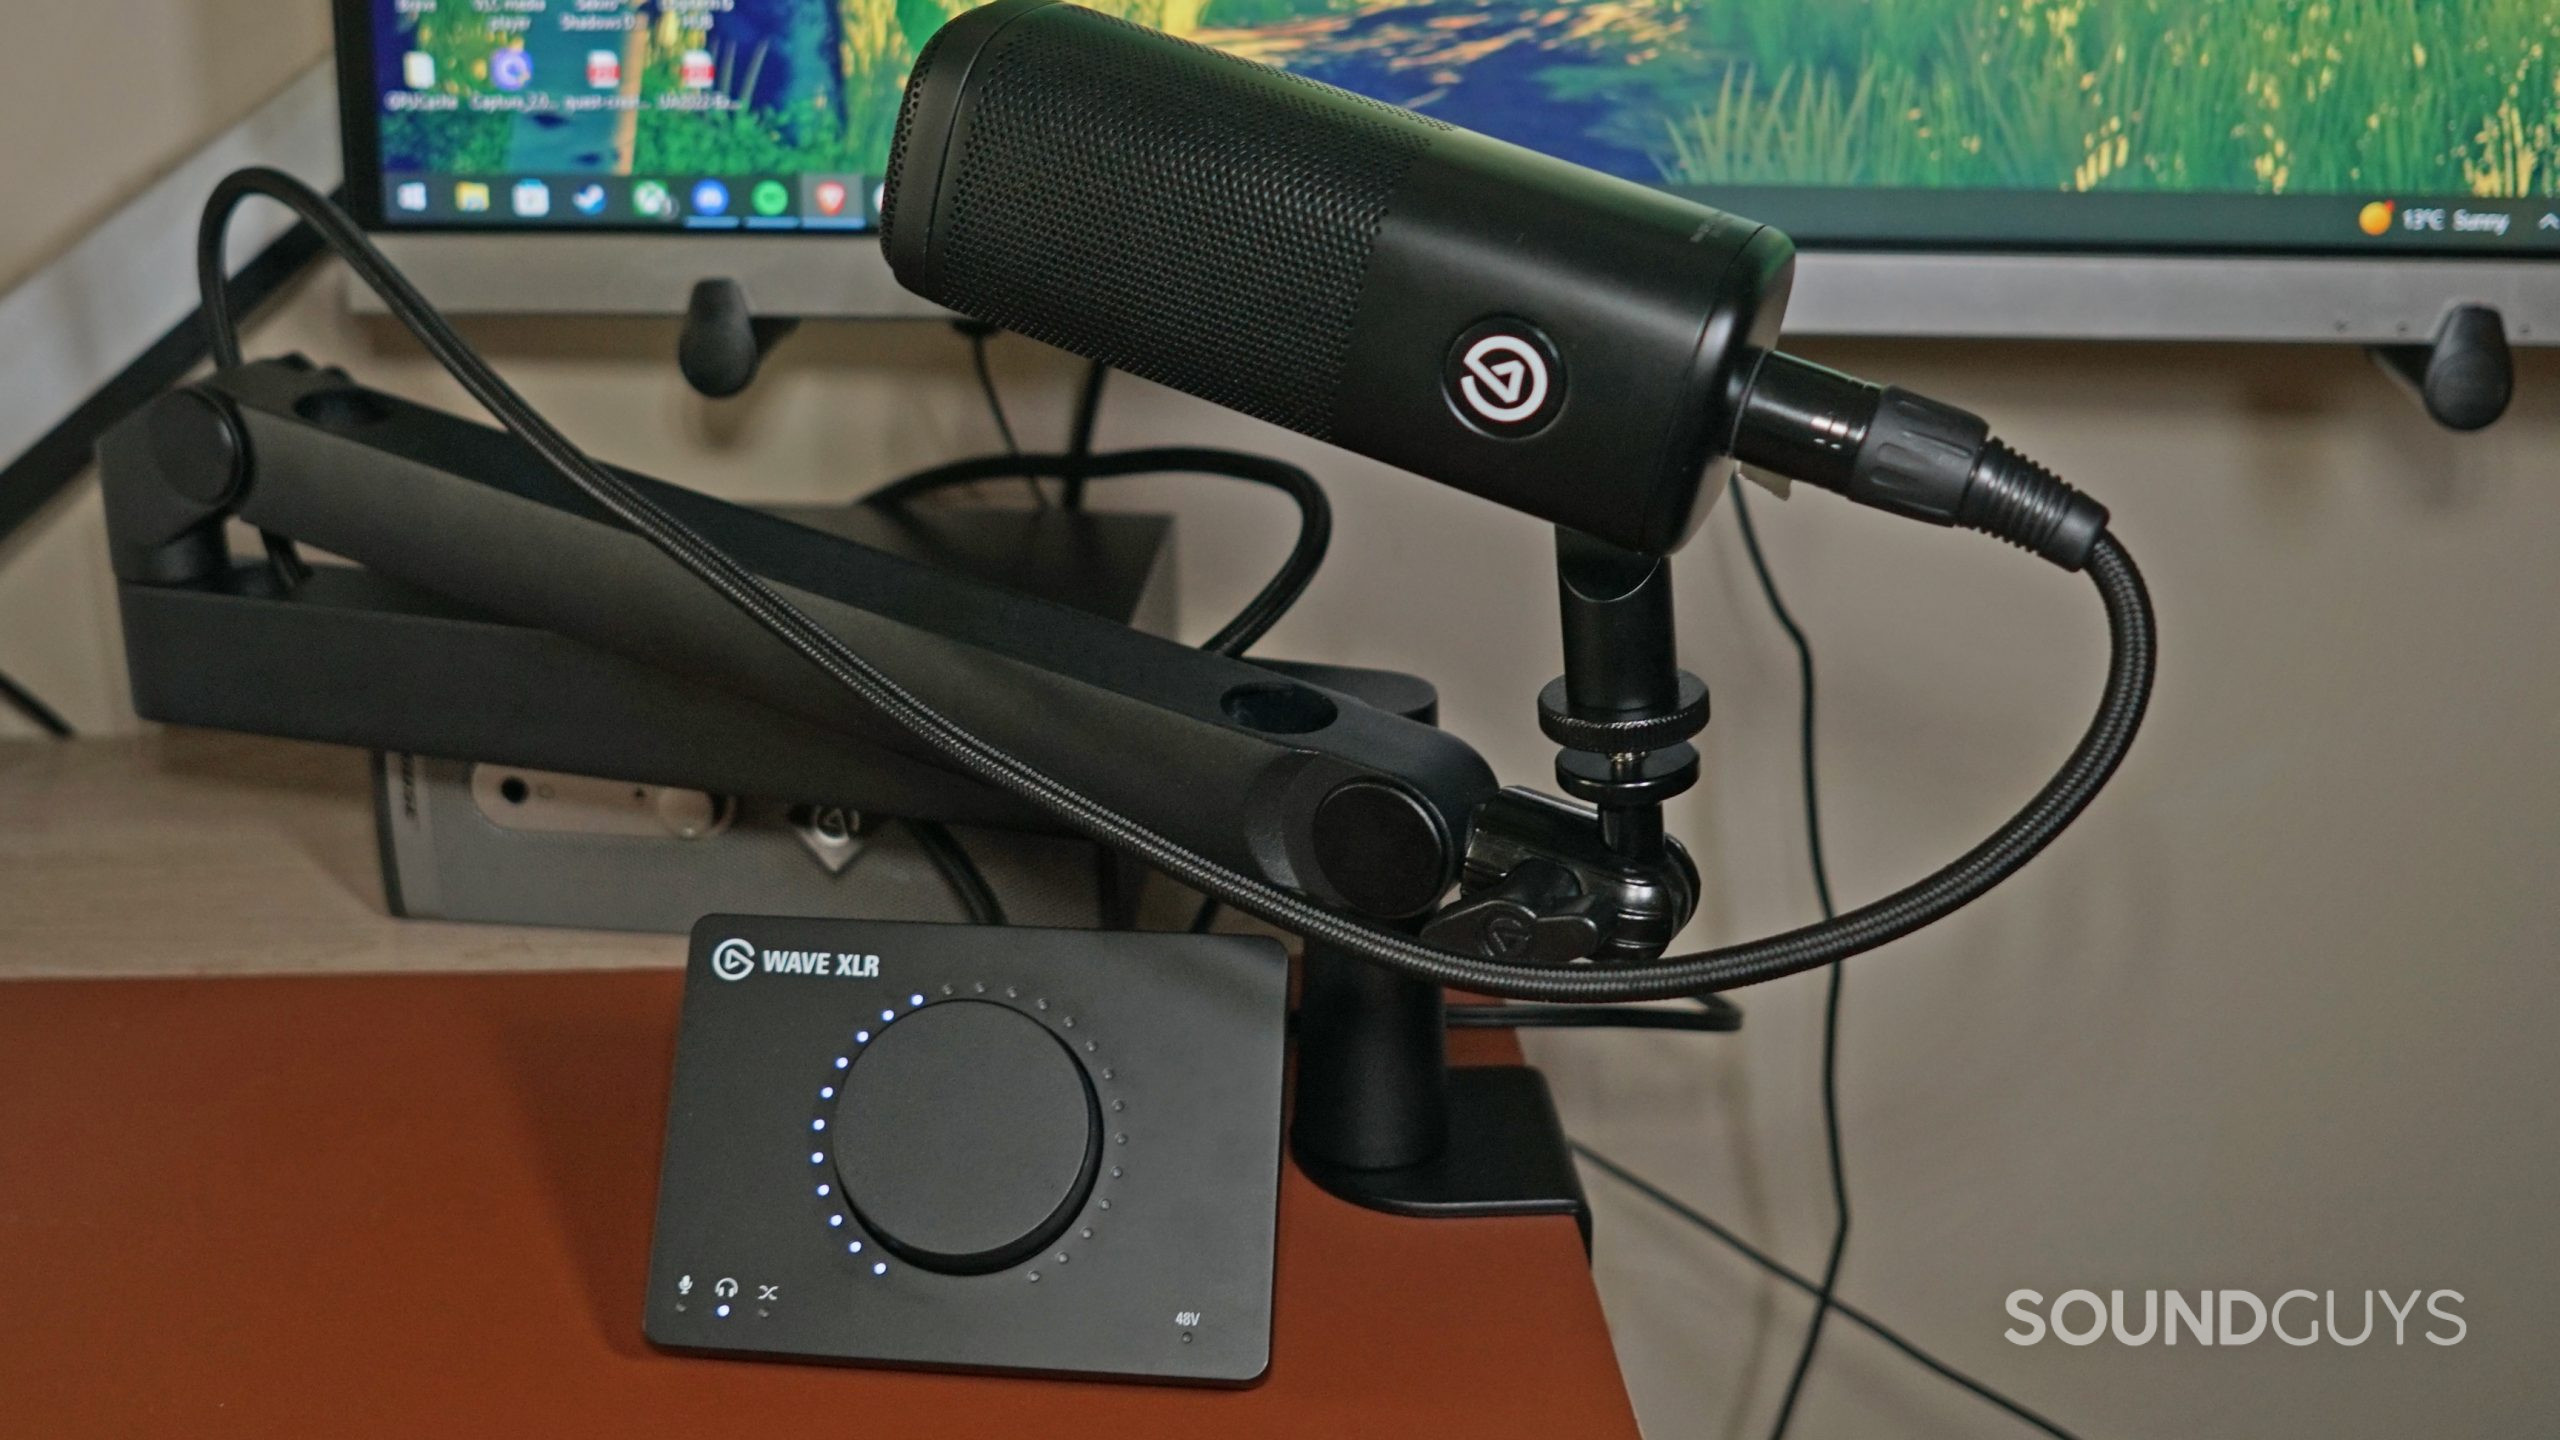 The Wave DX is the mic you NEED for streaming, The wait is over, Elgato  FINALLY has an XLR mic, and it sounds clean Presented by Elgato #ad